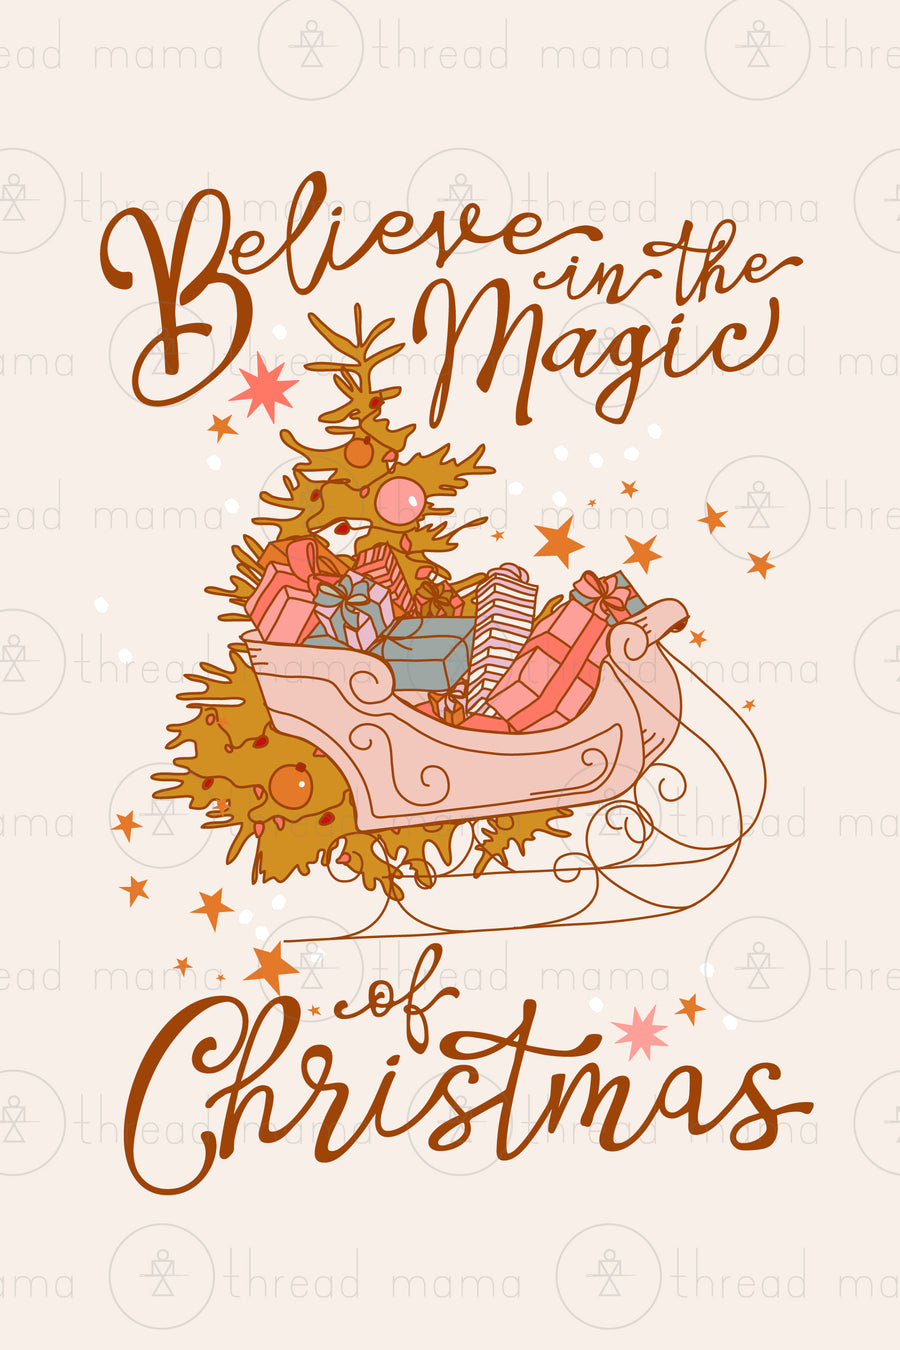 Believe in the Magic of Christmas - Set